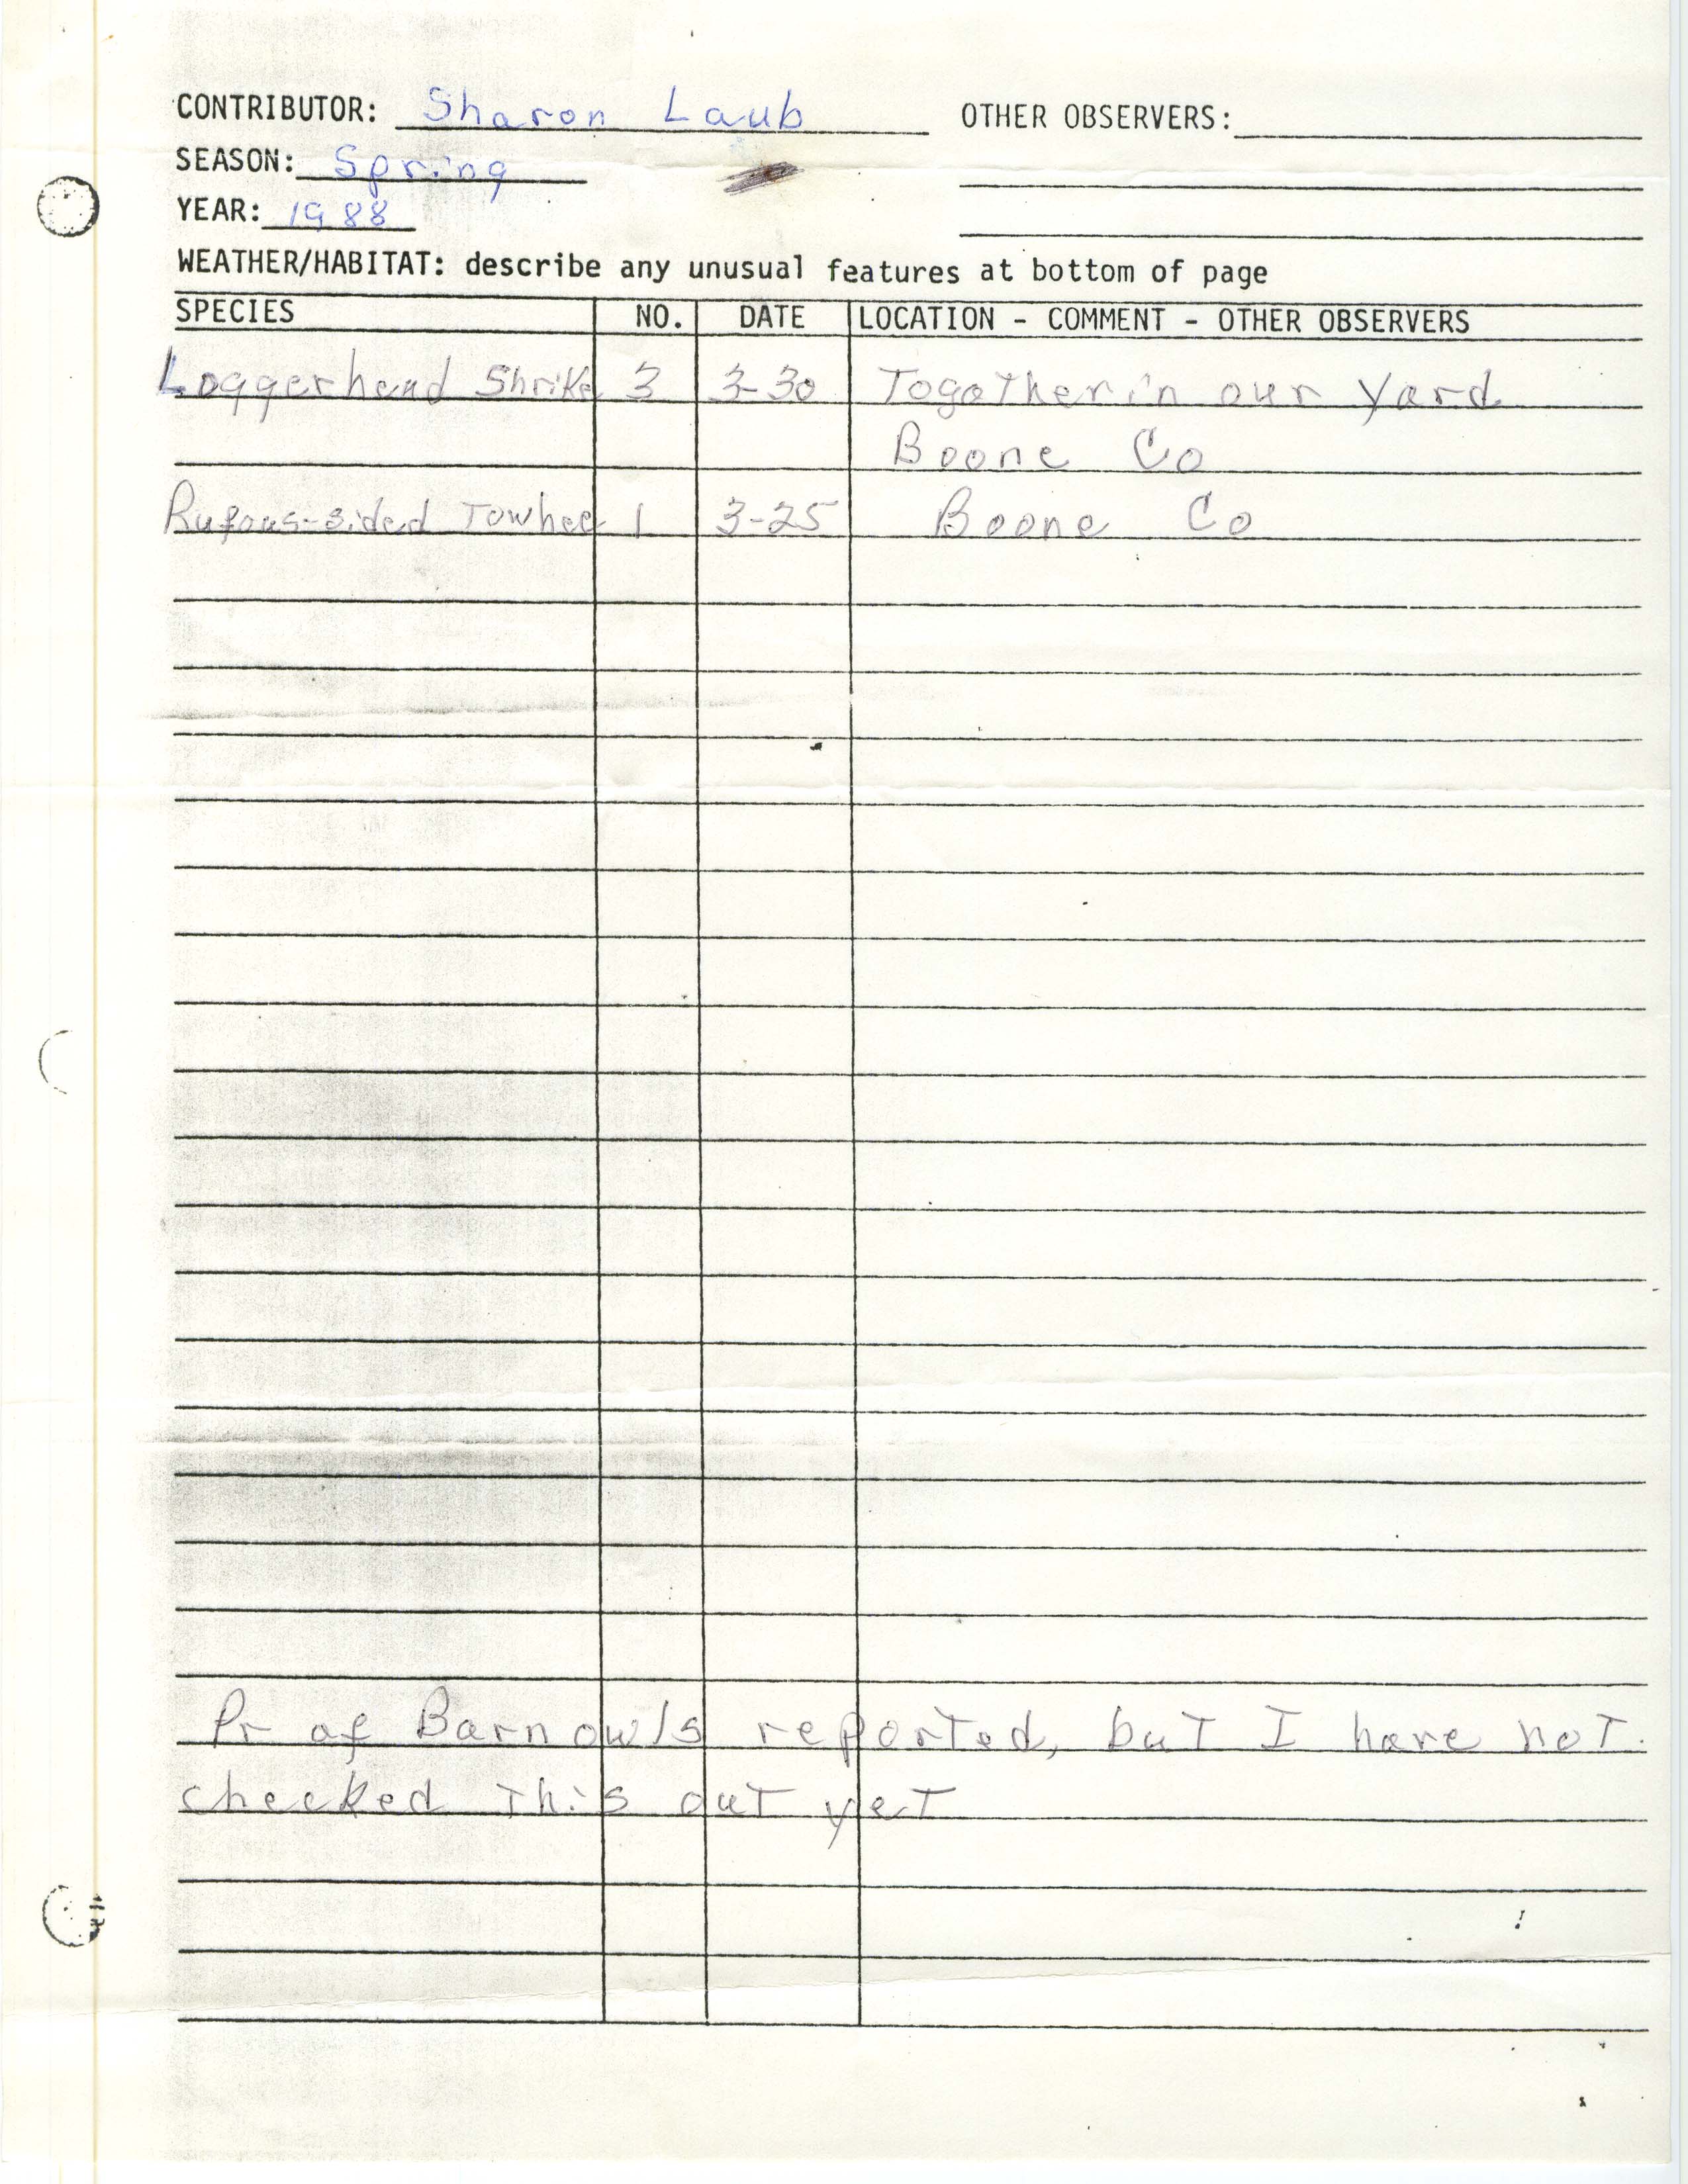 Field notes contributed by Sharon Laub, spring 1988